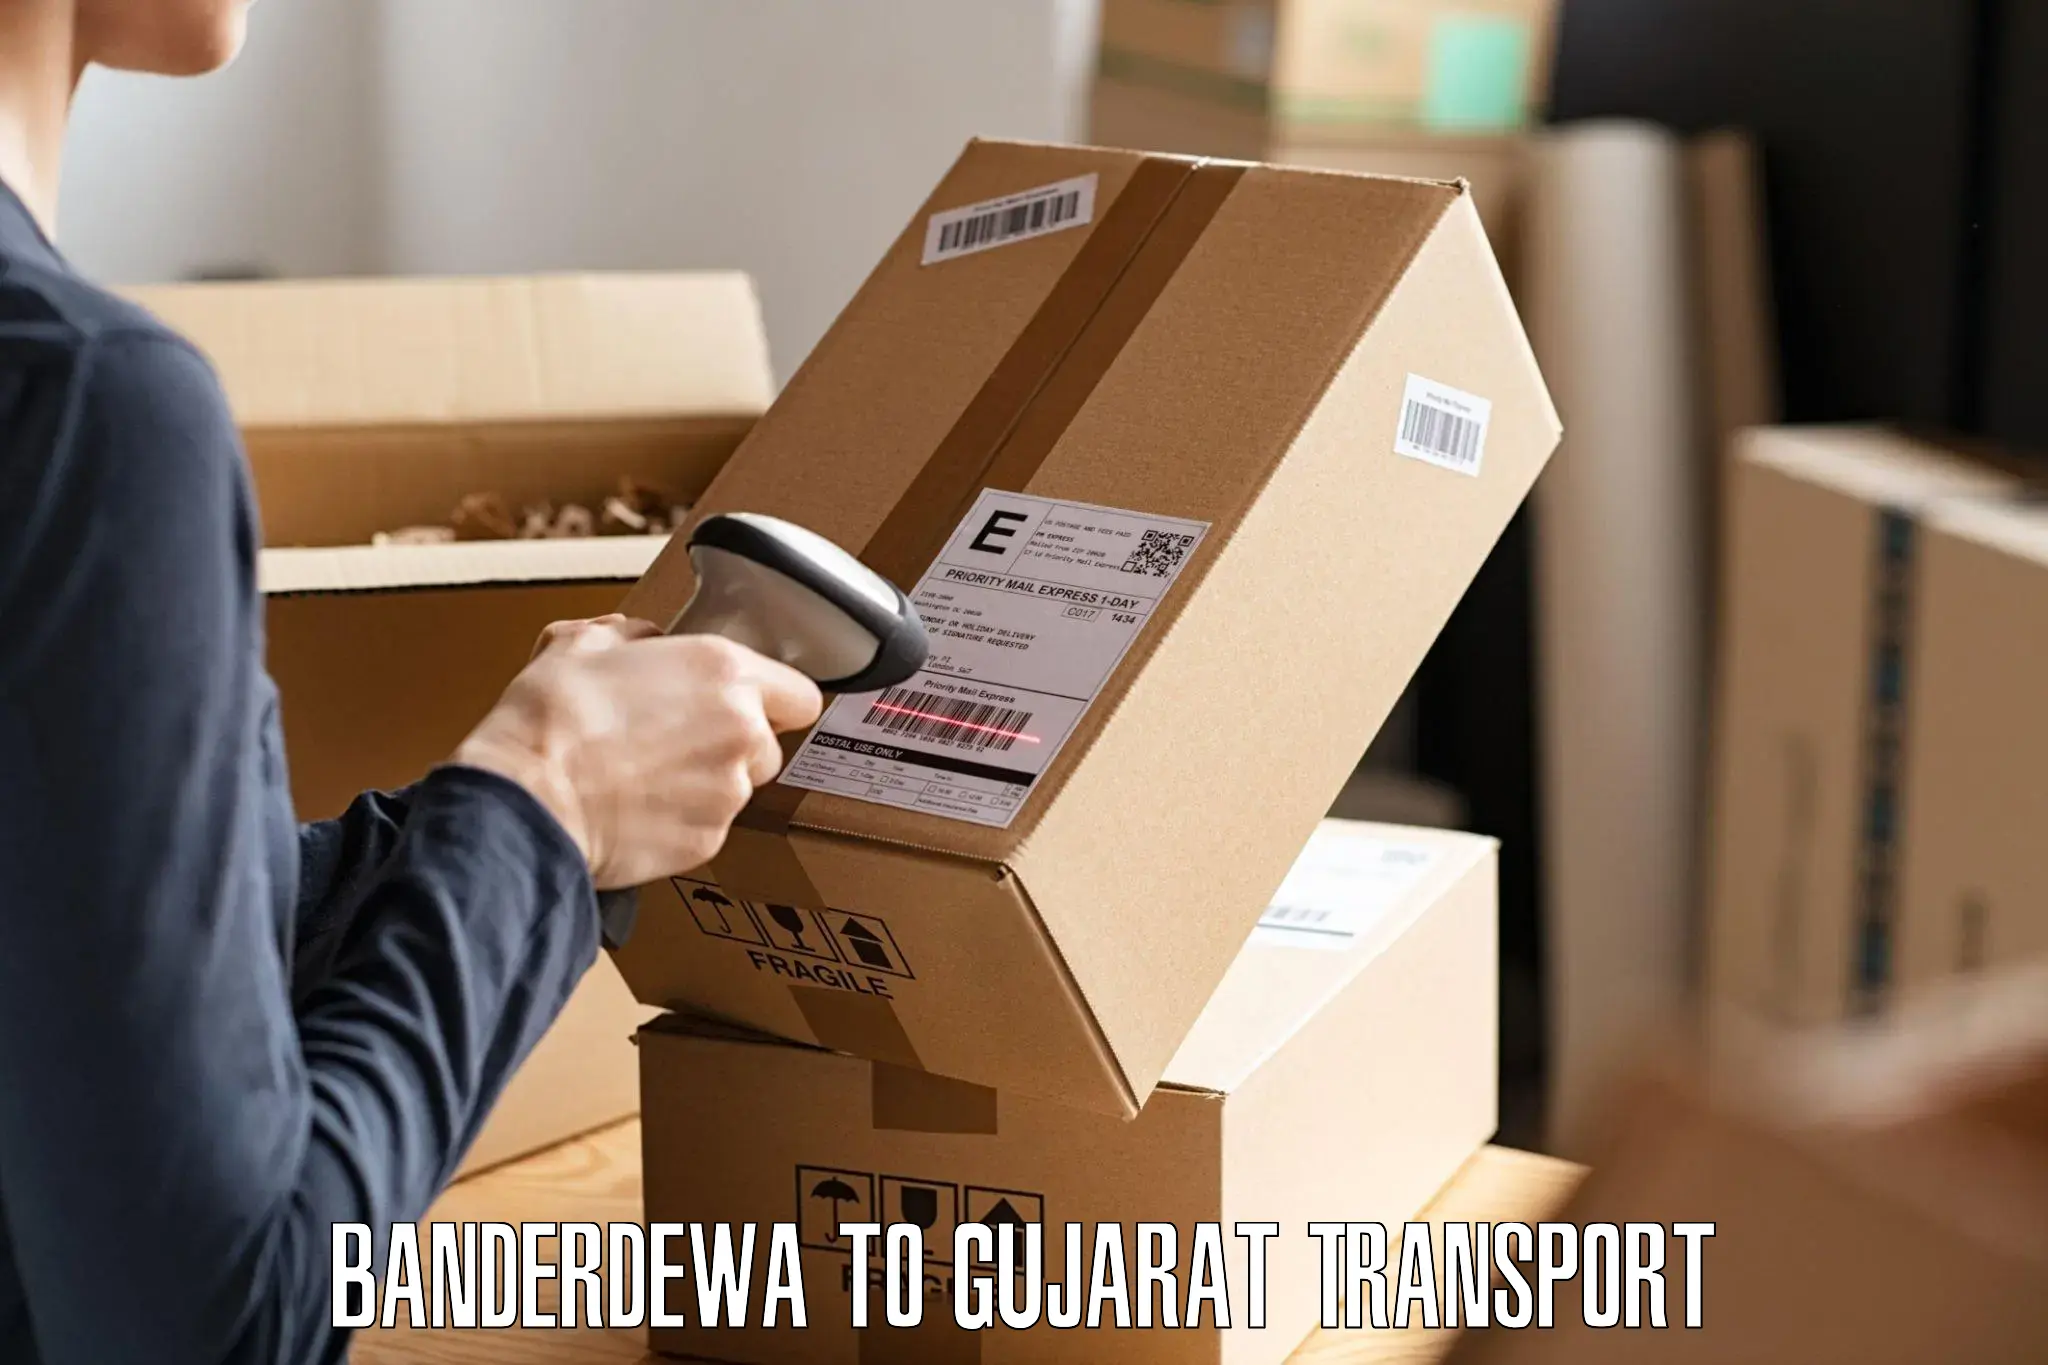 Two wheeler parcel service Banderdewa to Anand